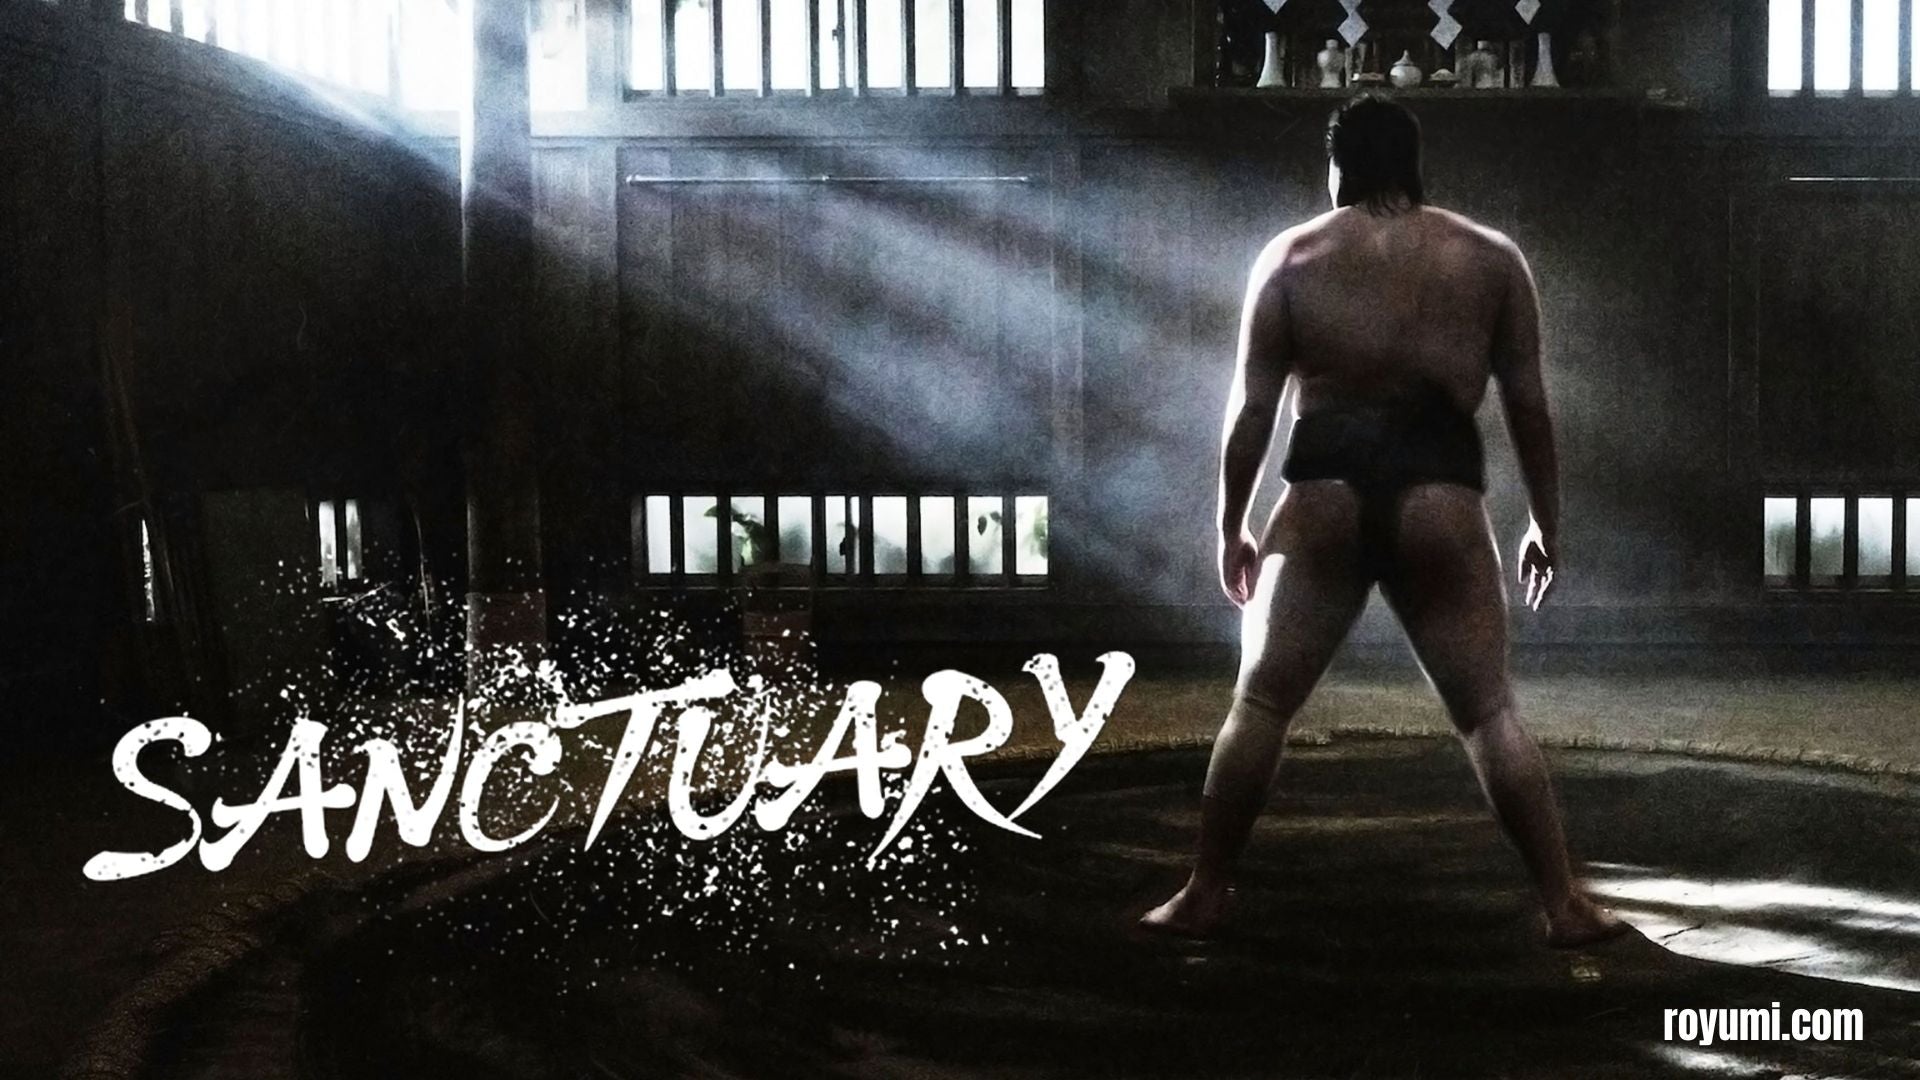 Immerse yourself in the exciting world of sumo with ‘Sanctuary’: Drama, action and passion in every fight